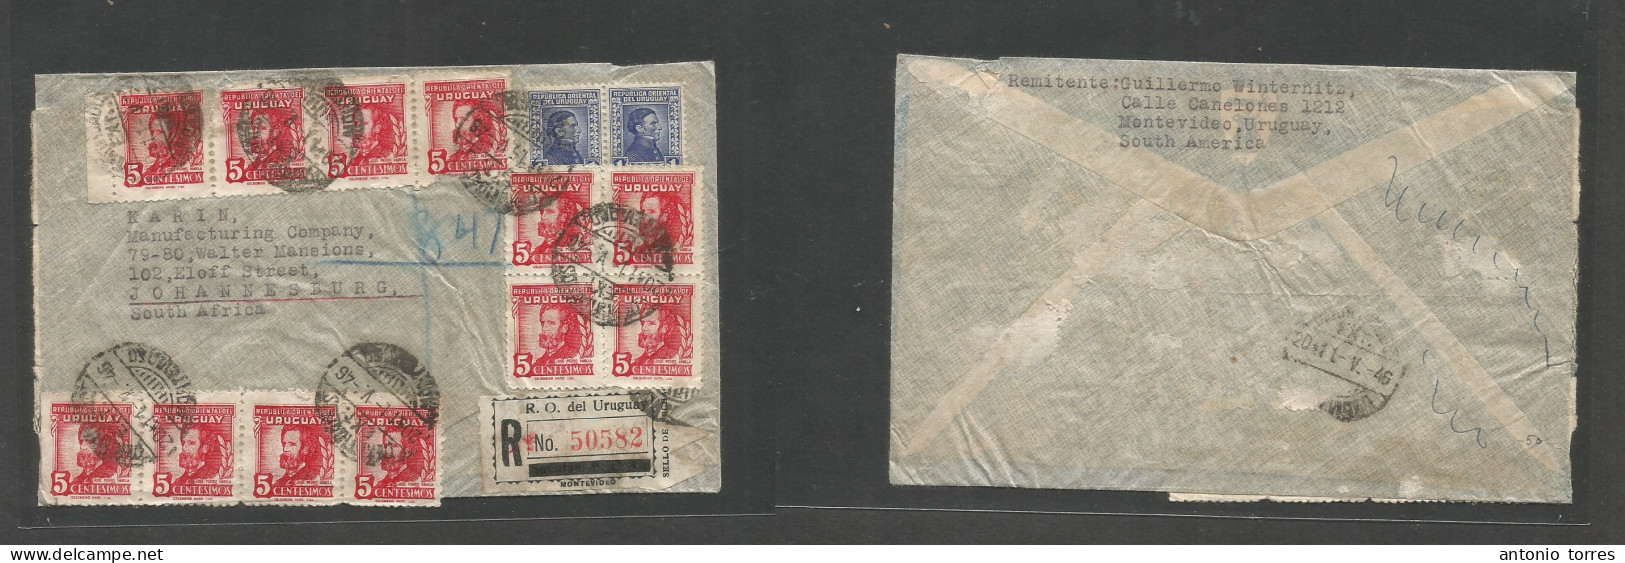 Uruguay. 1946 (11 May) Montevideo - South Africa, Joburg. Registered Air Multifkd Envelope At 62r Rate. VF. Proceres + R - Uruguay